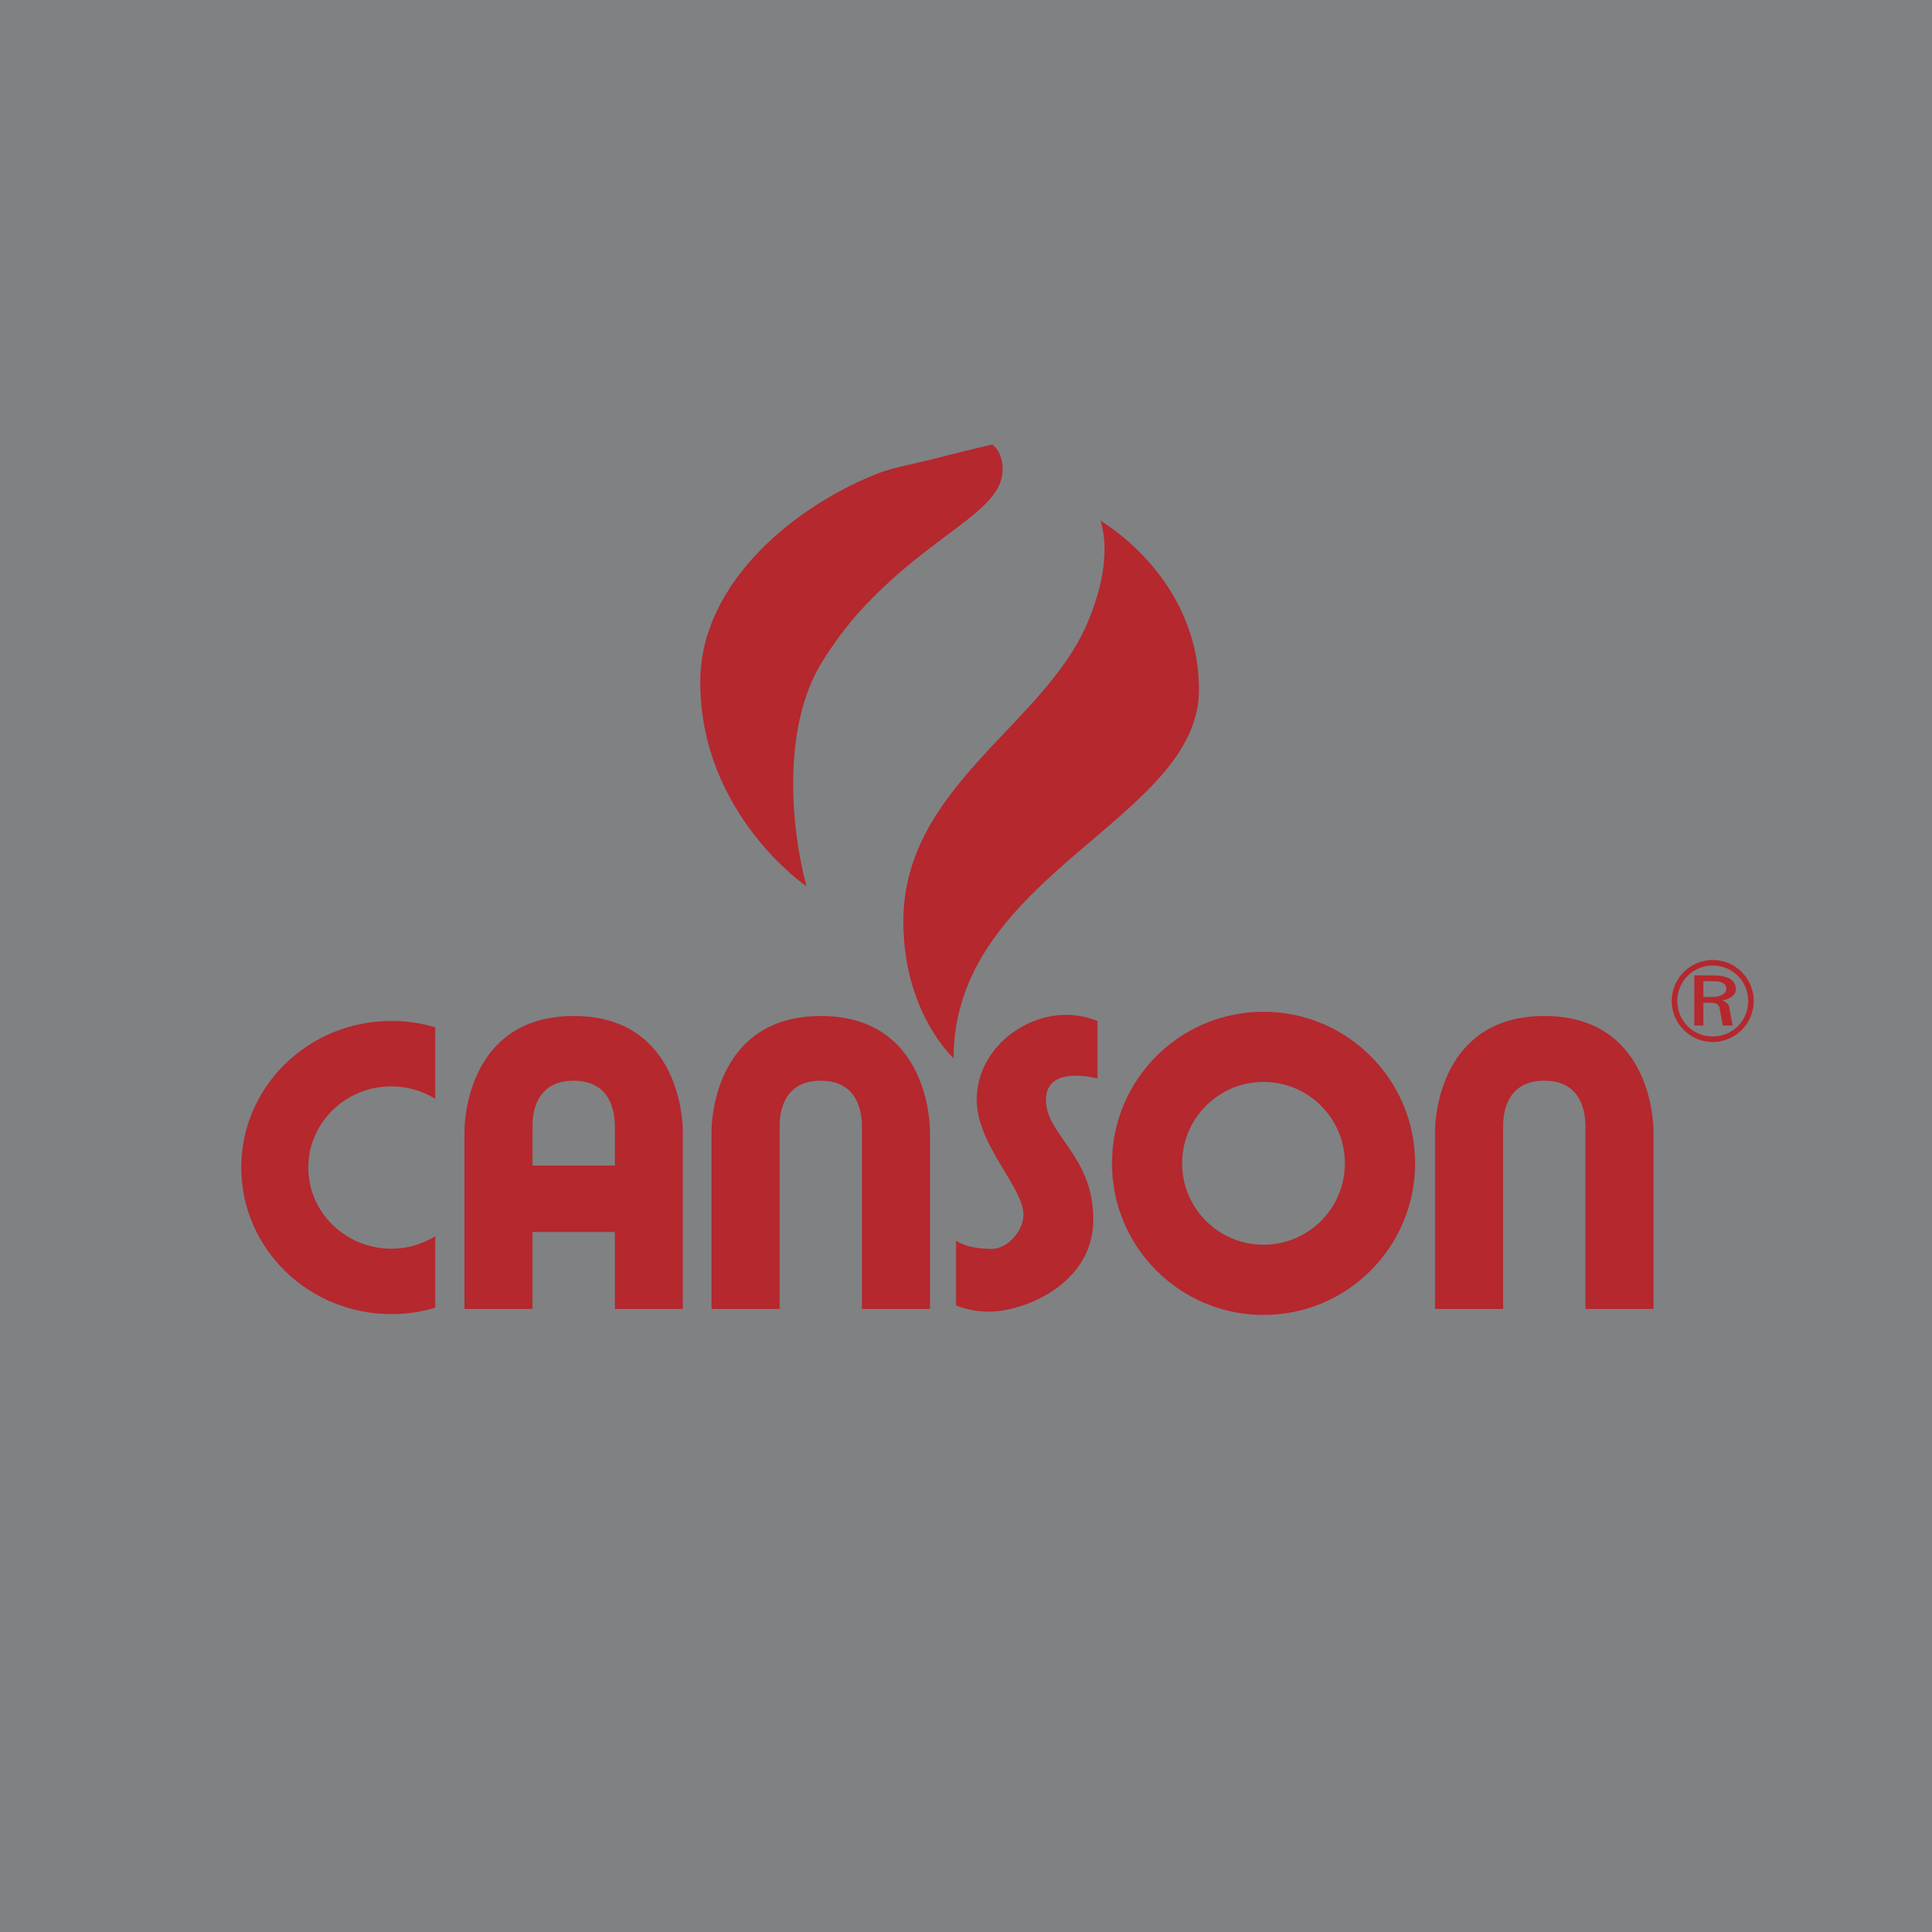 Canson Logo - Canson Logo PNG Transparent & SVG Vector - Freebie Supply